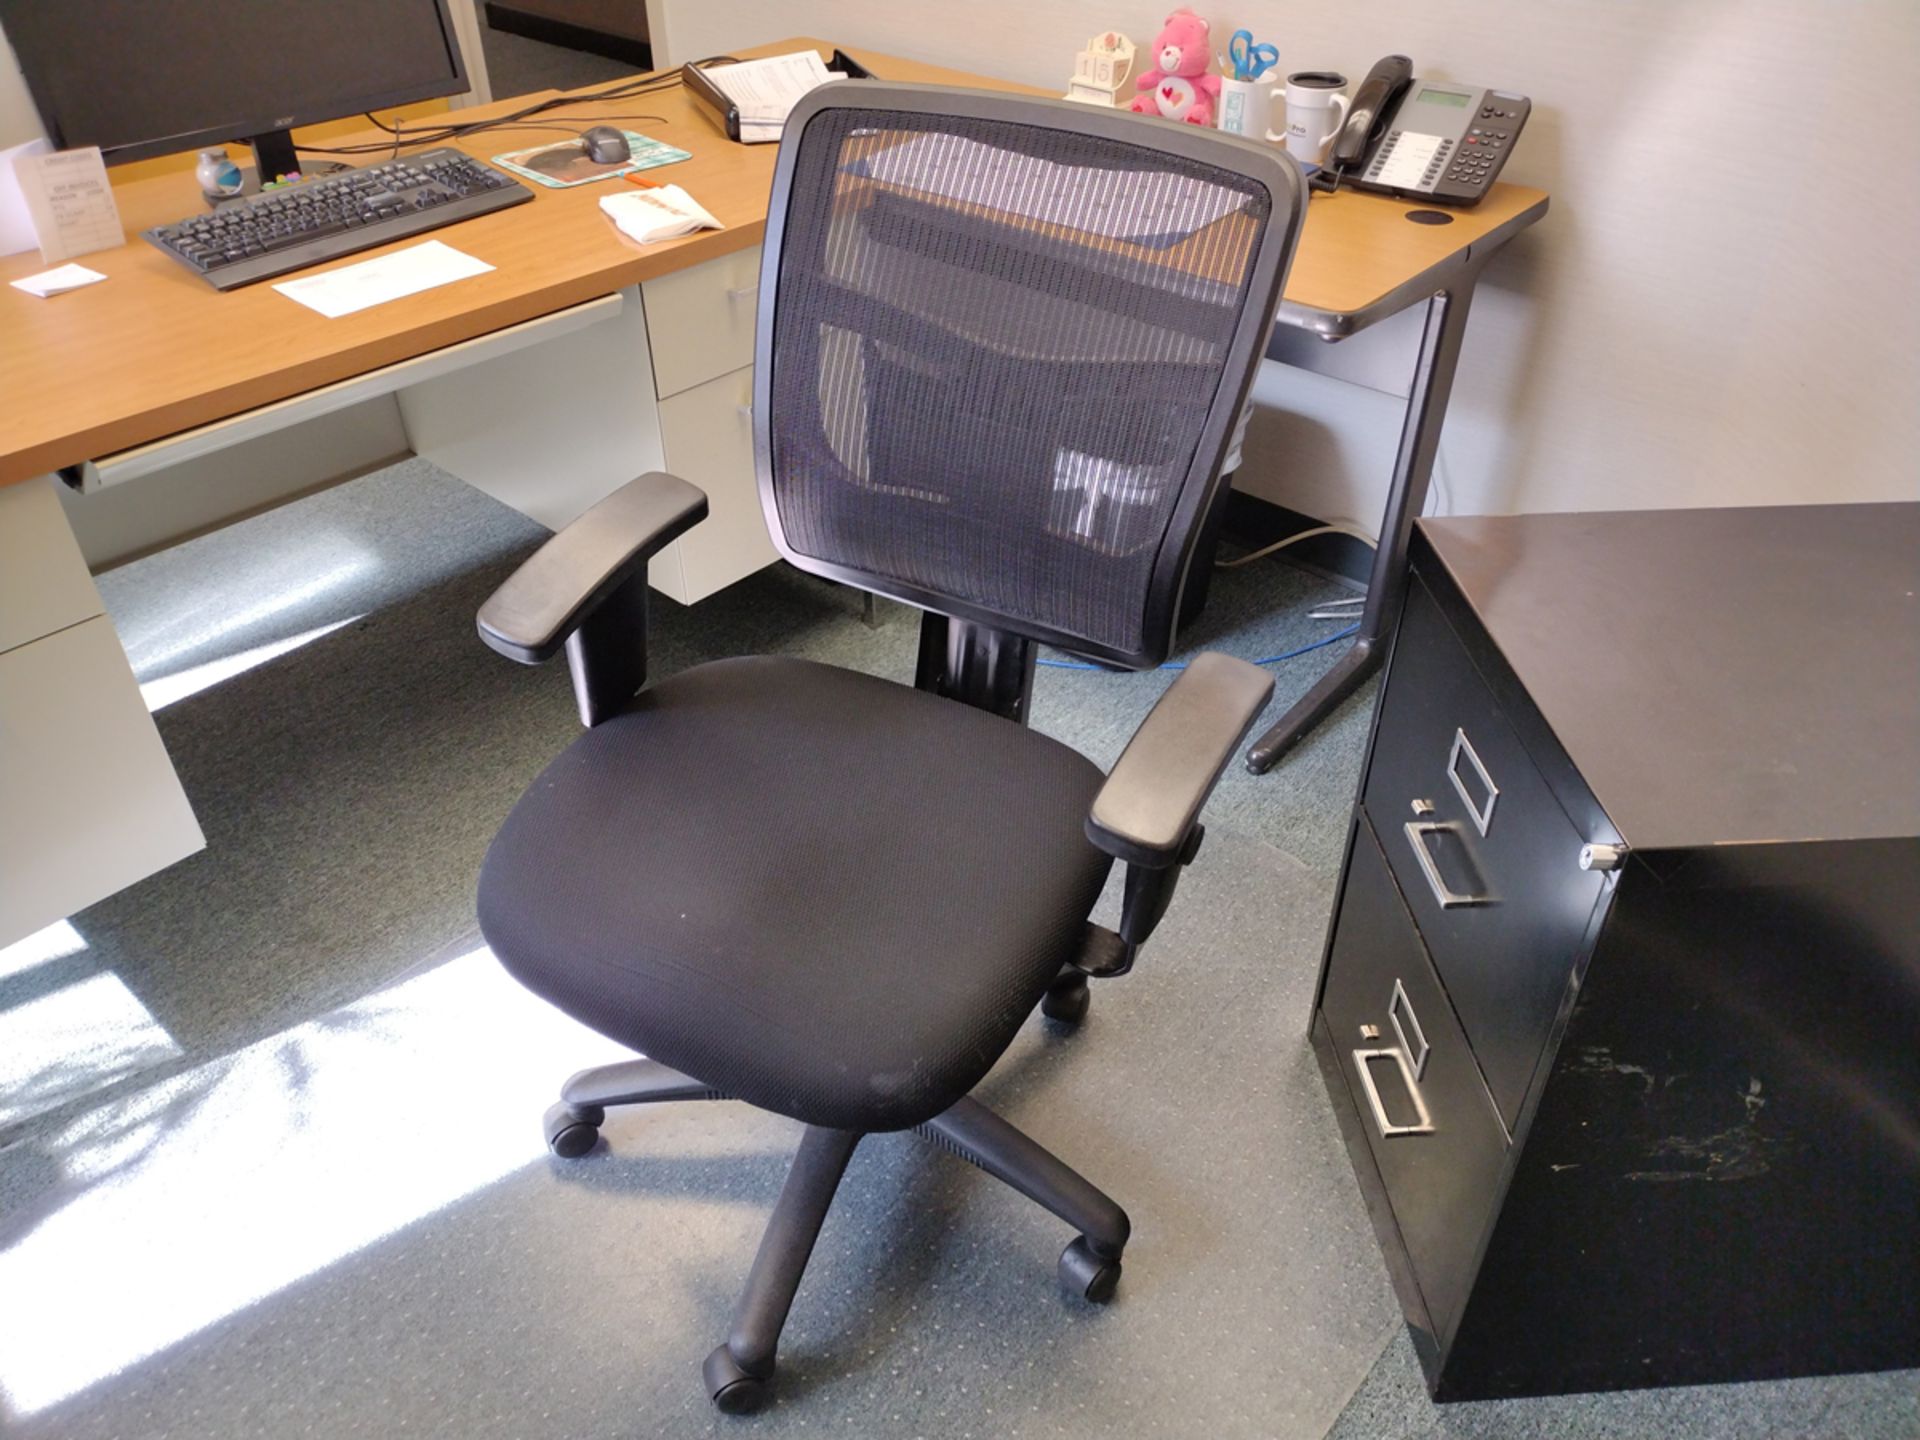 Group of Office Furniture Throughout Rooms - Image 14 of 14